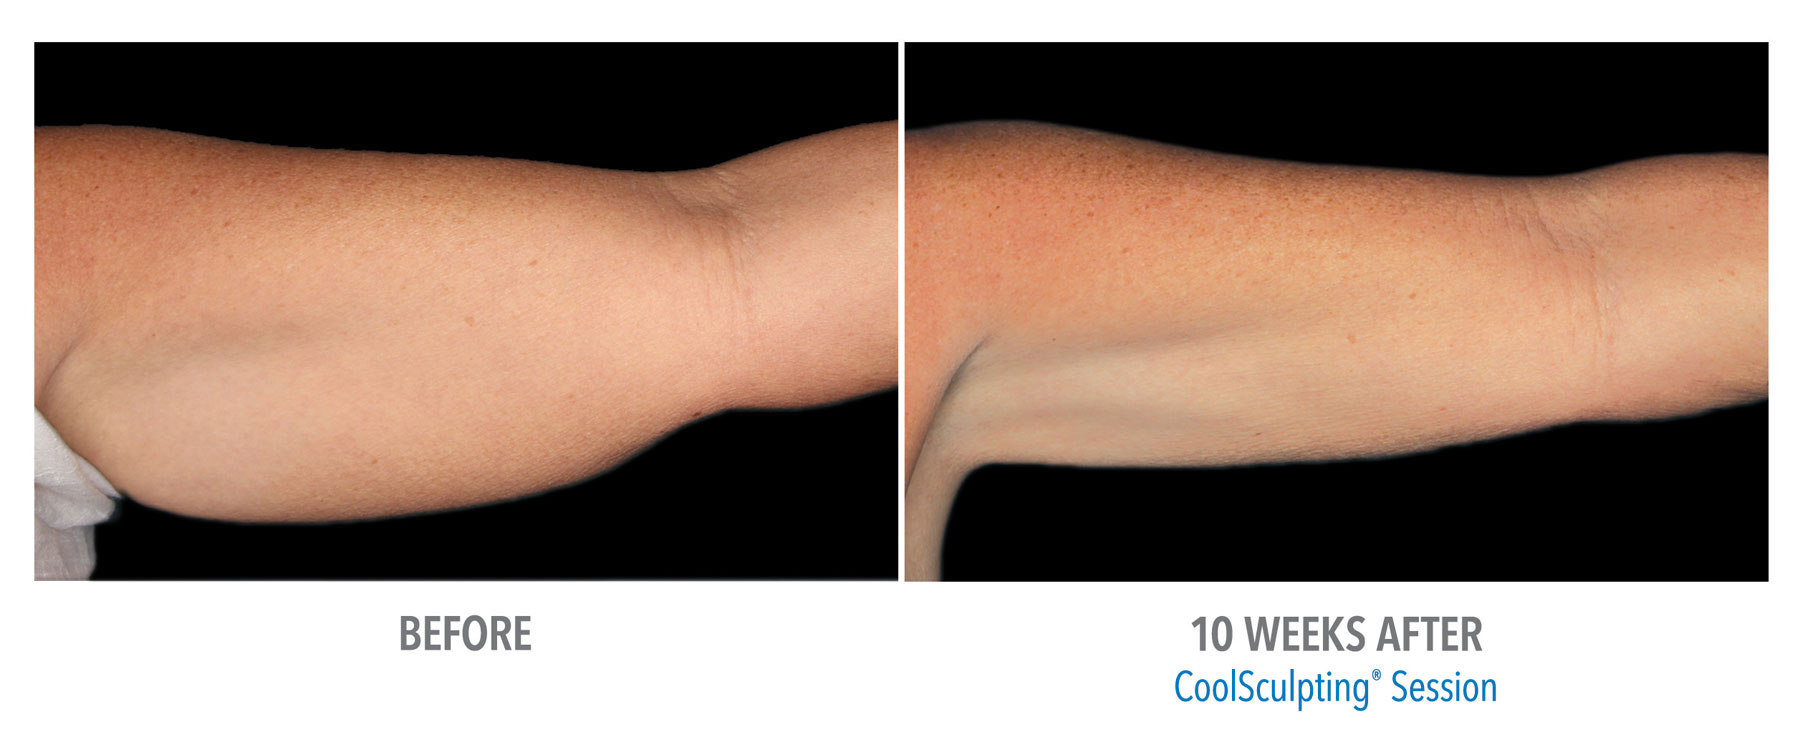 CoolSculpting-Before-After-Female-Arms-1